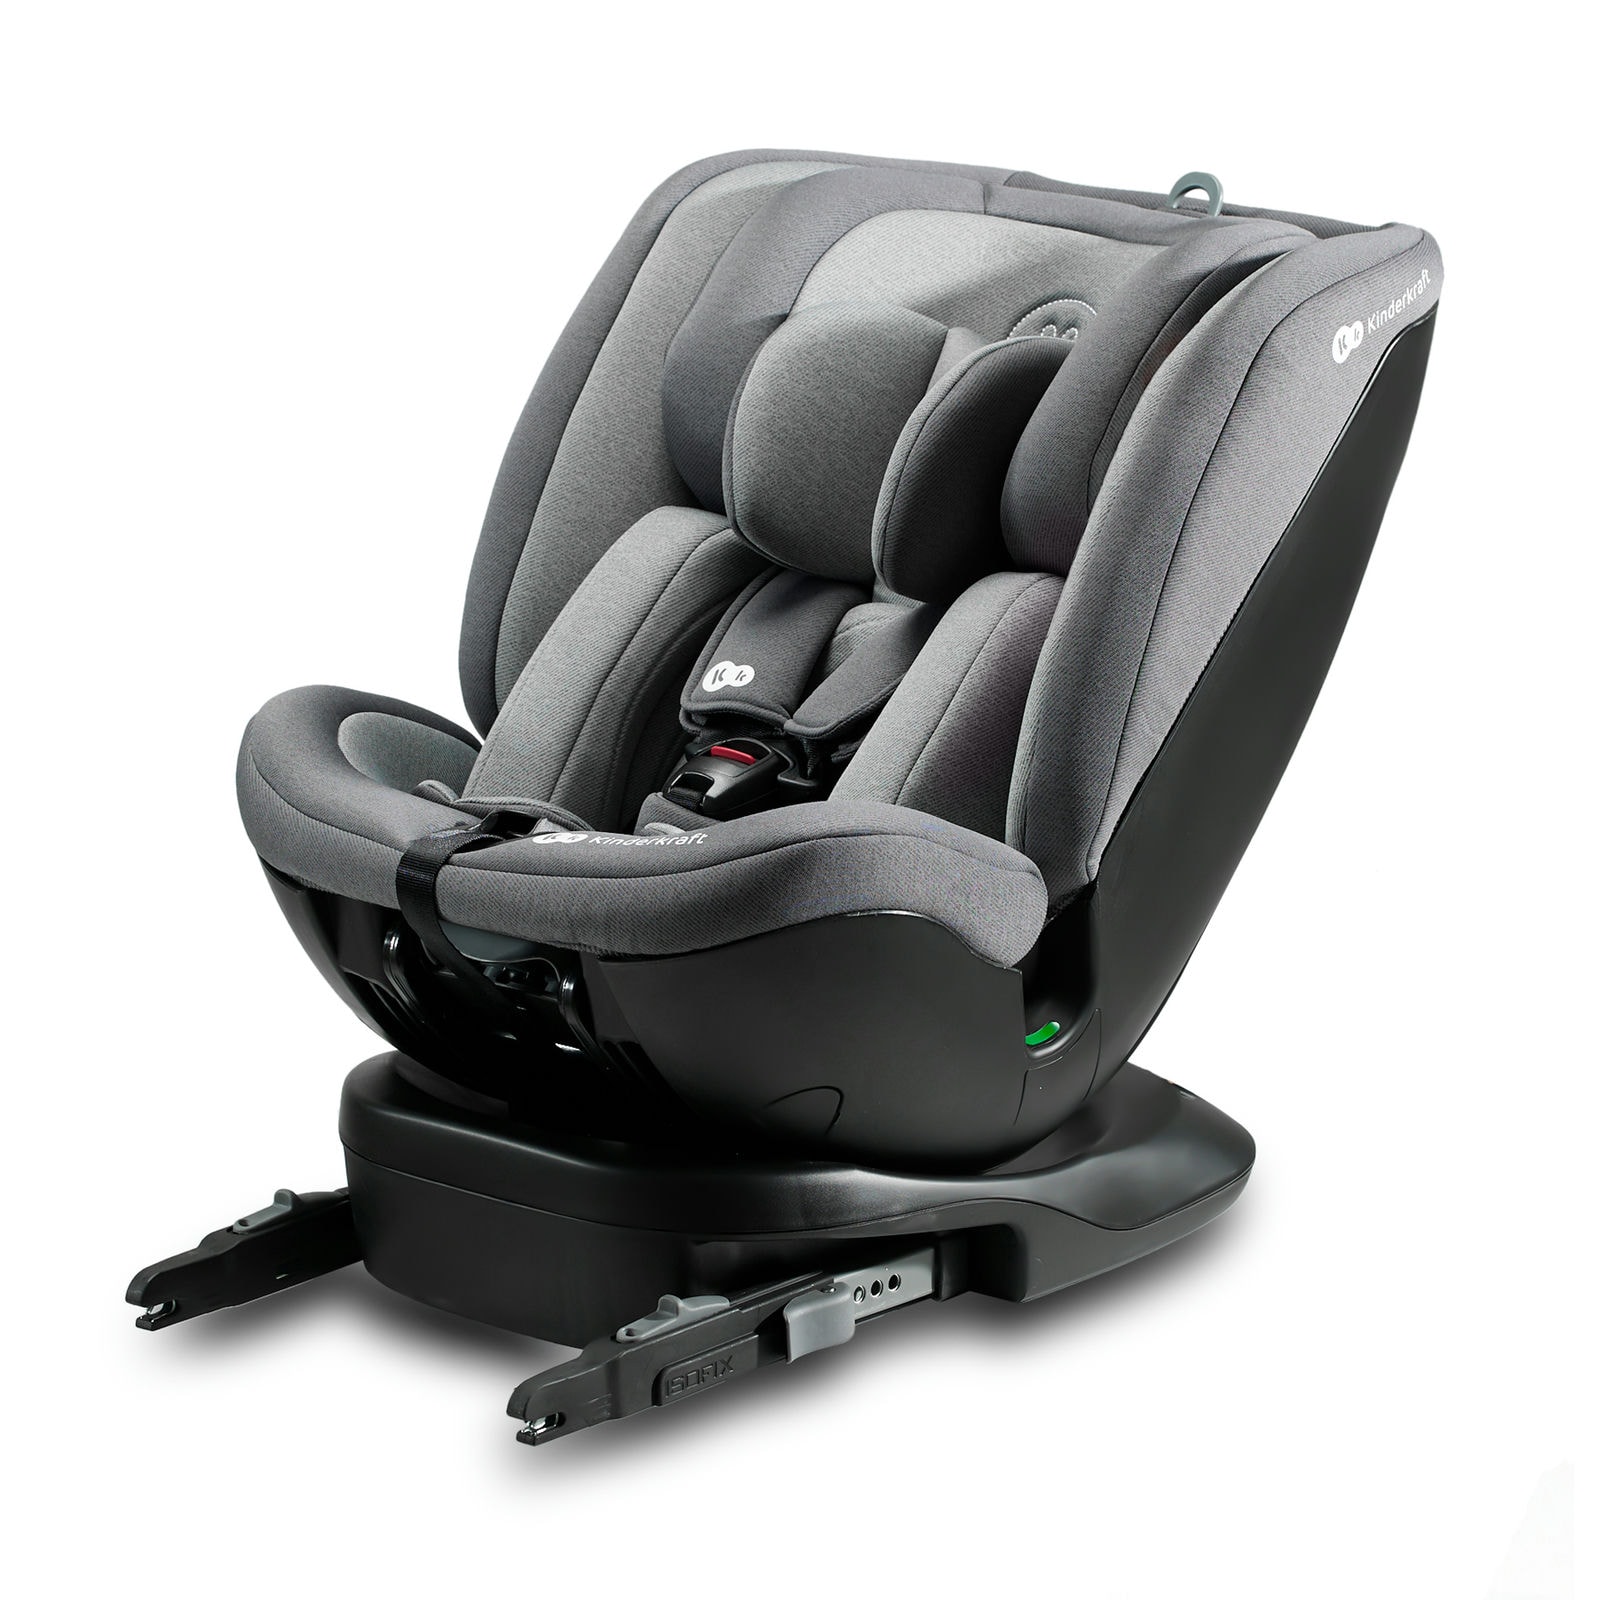 Car seat XPEDITION 2 i-Size grey from Kinderkraft